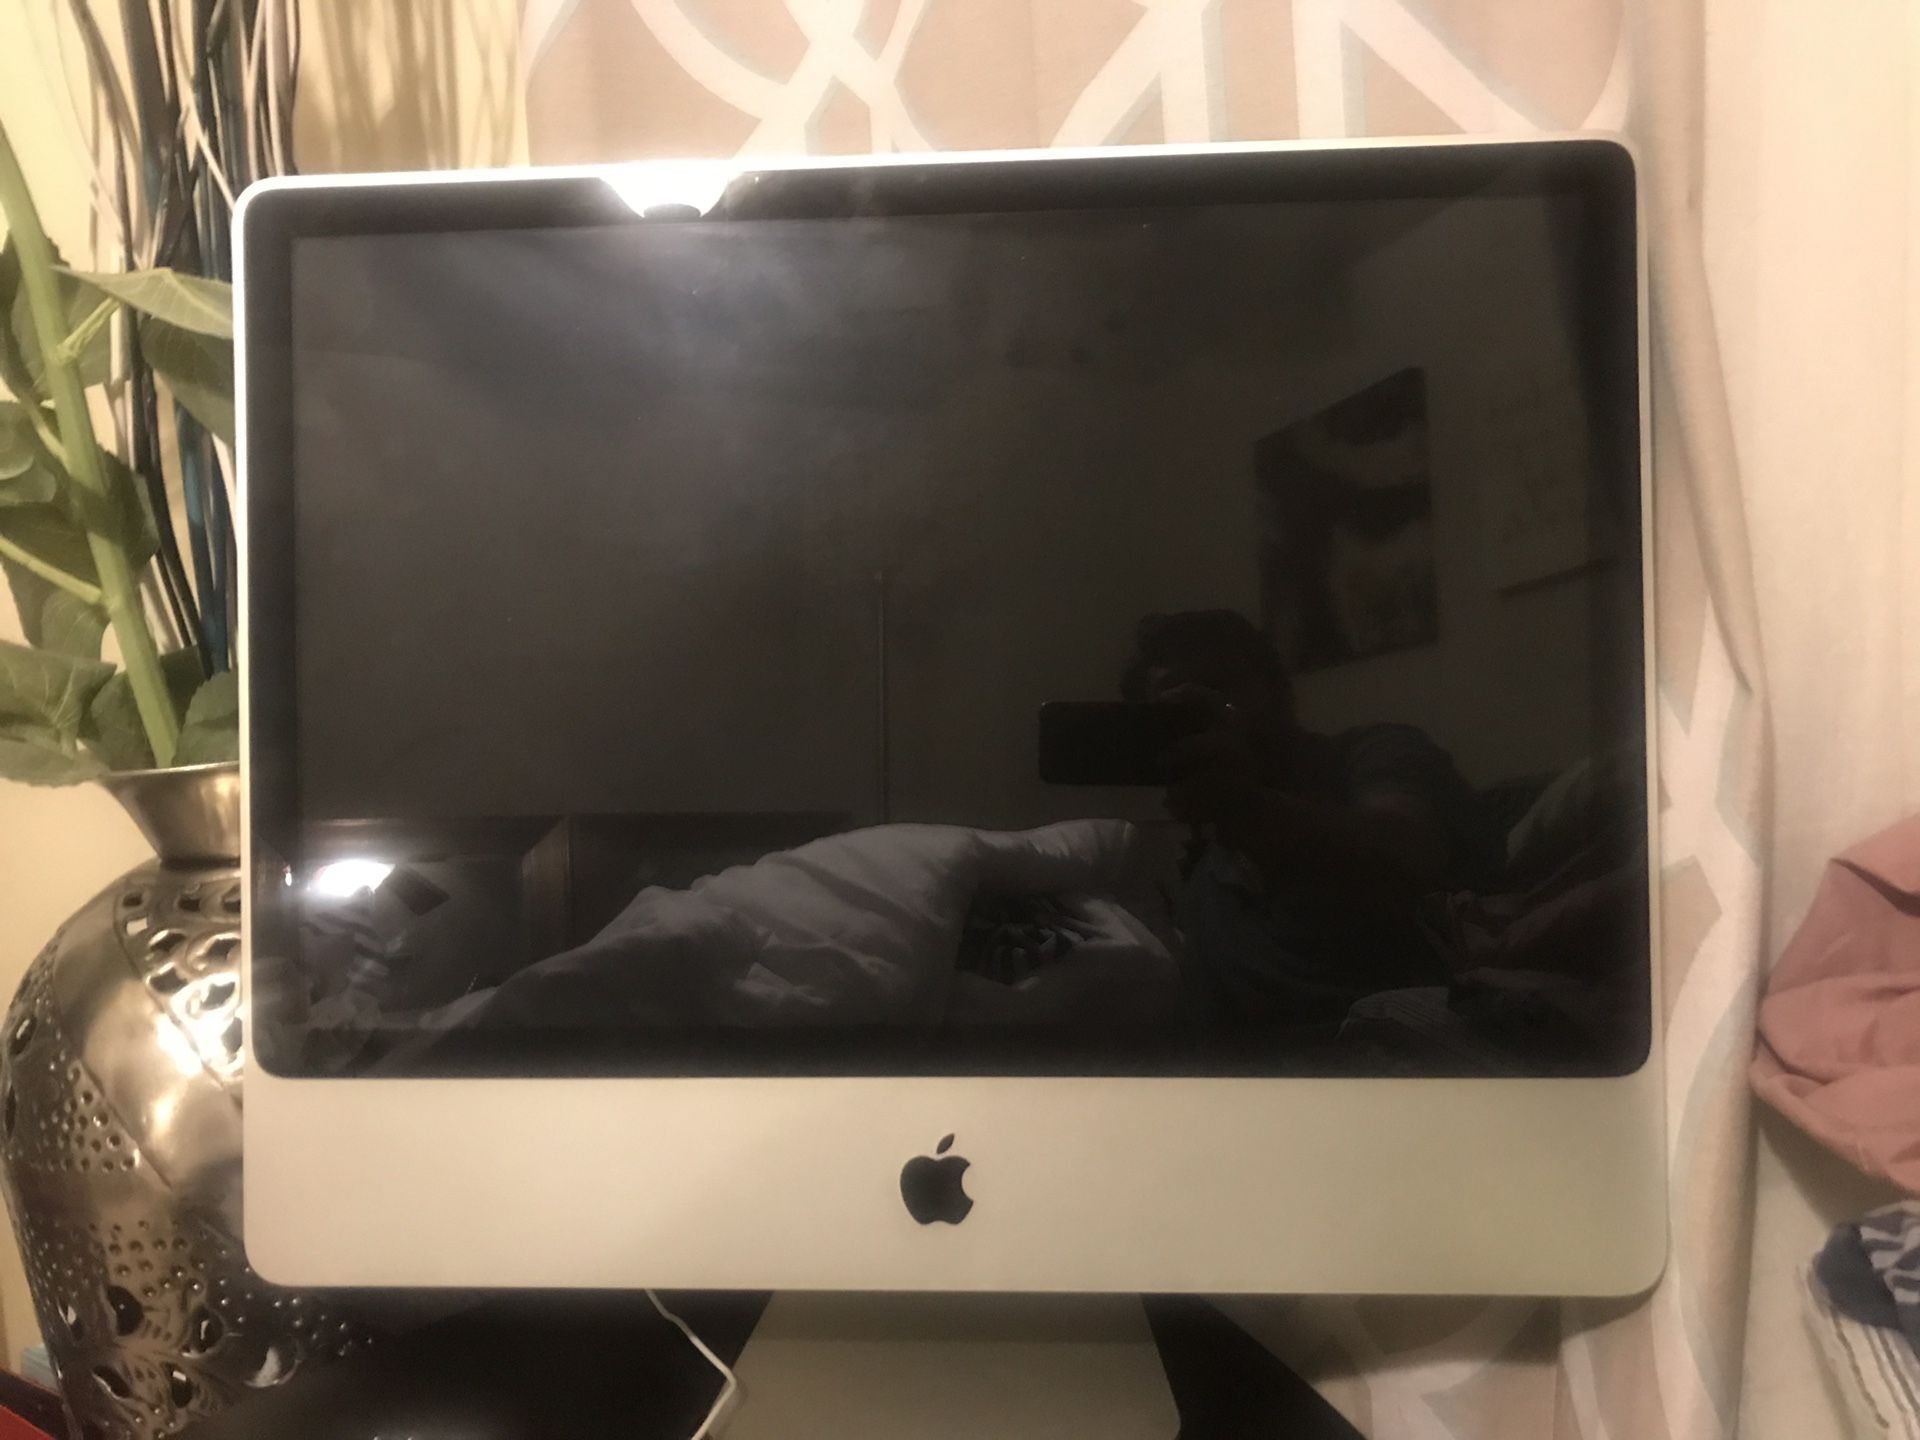 iMac computer with New Keyboard and Mouse